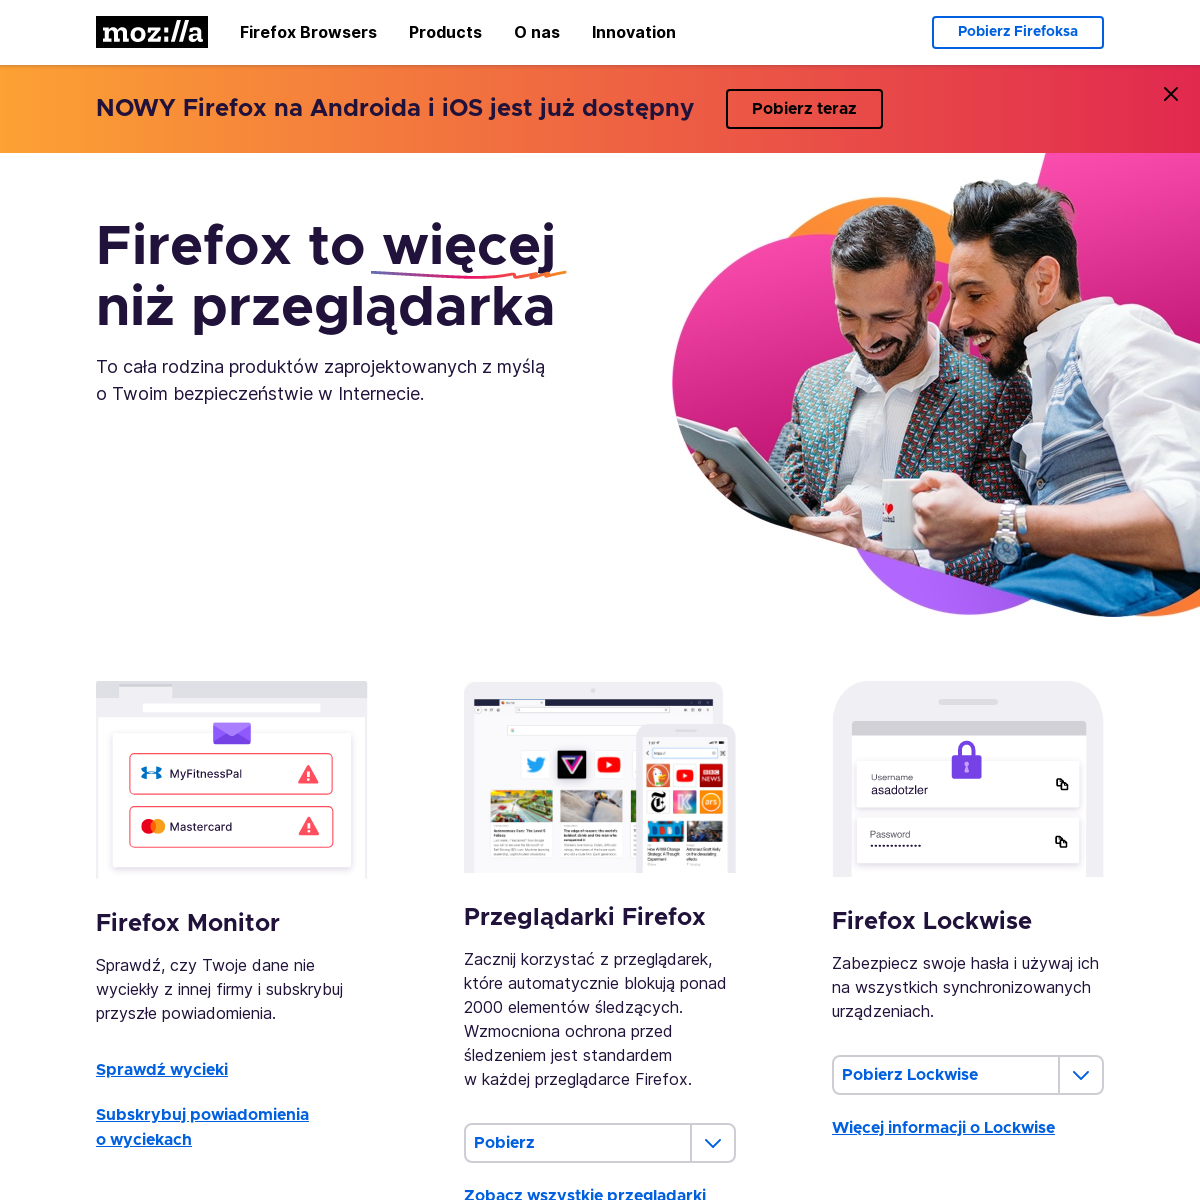 A complete backup of firefox.pl